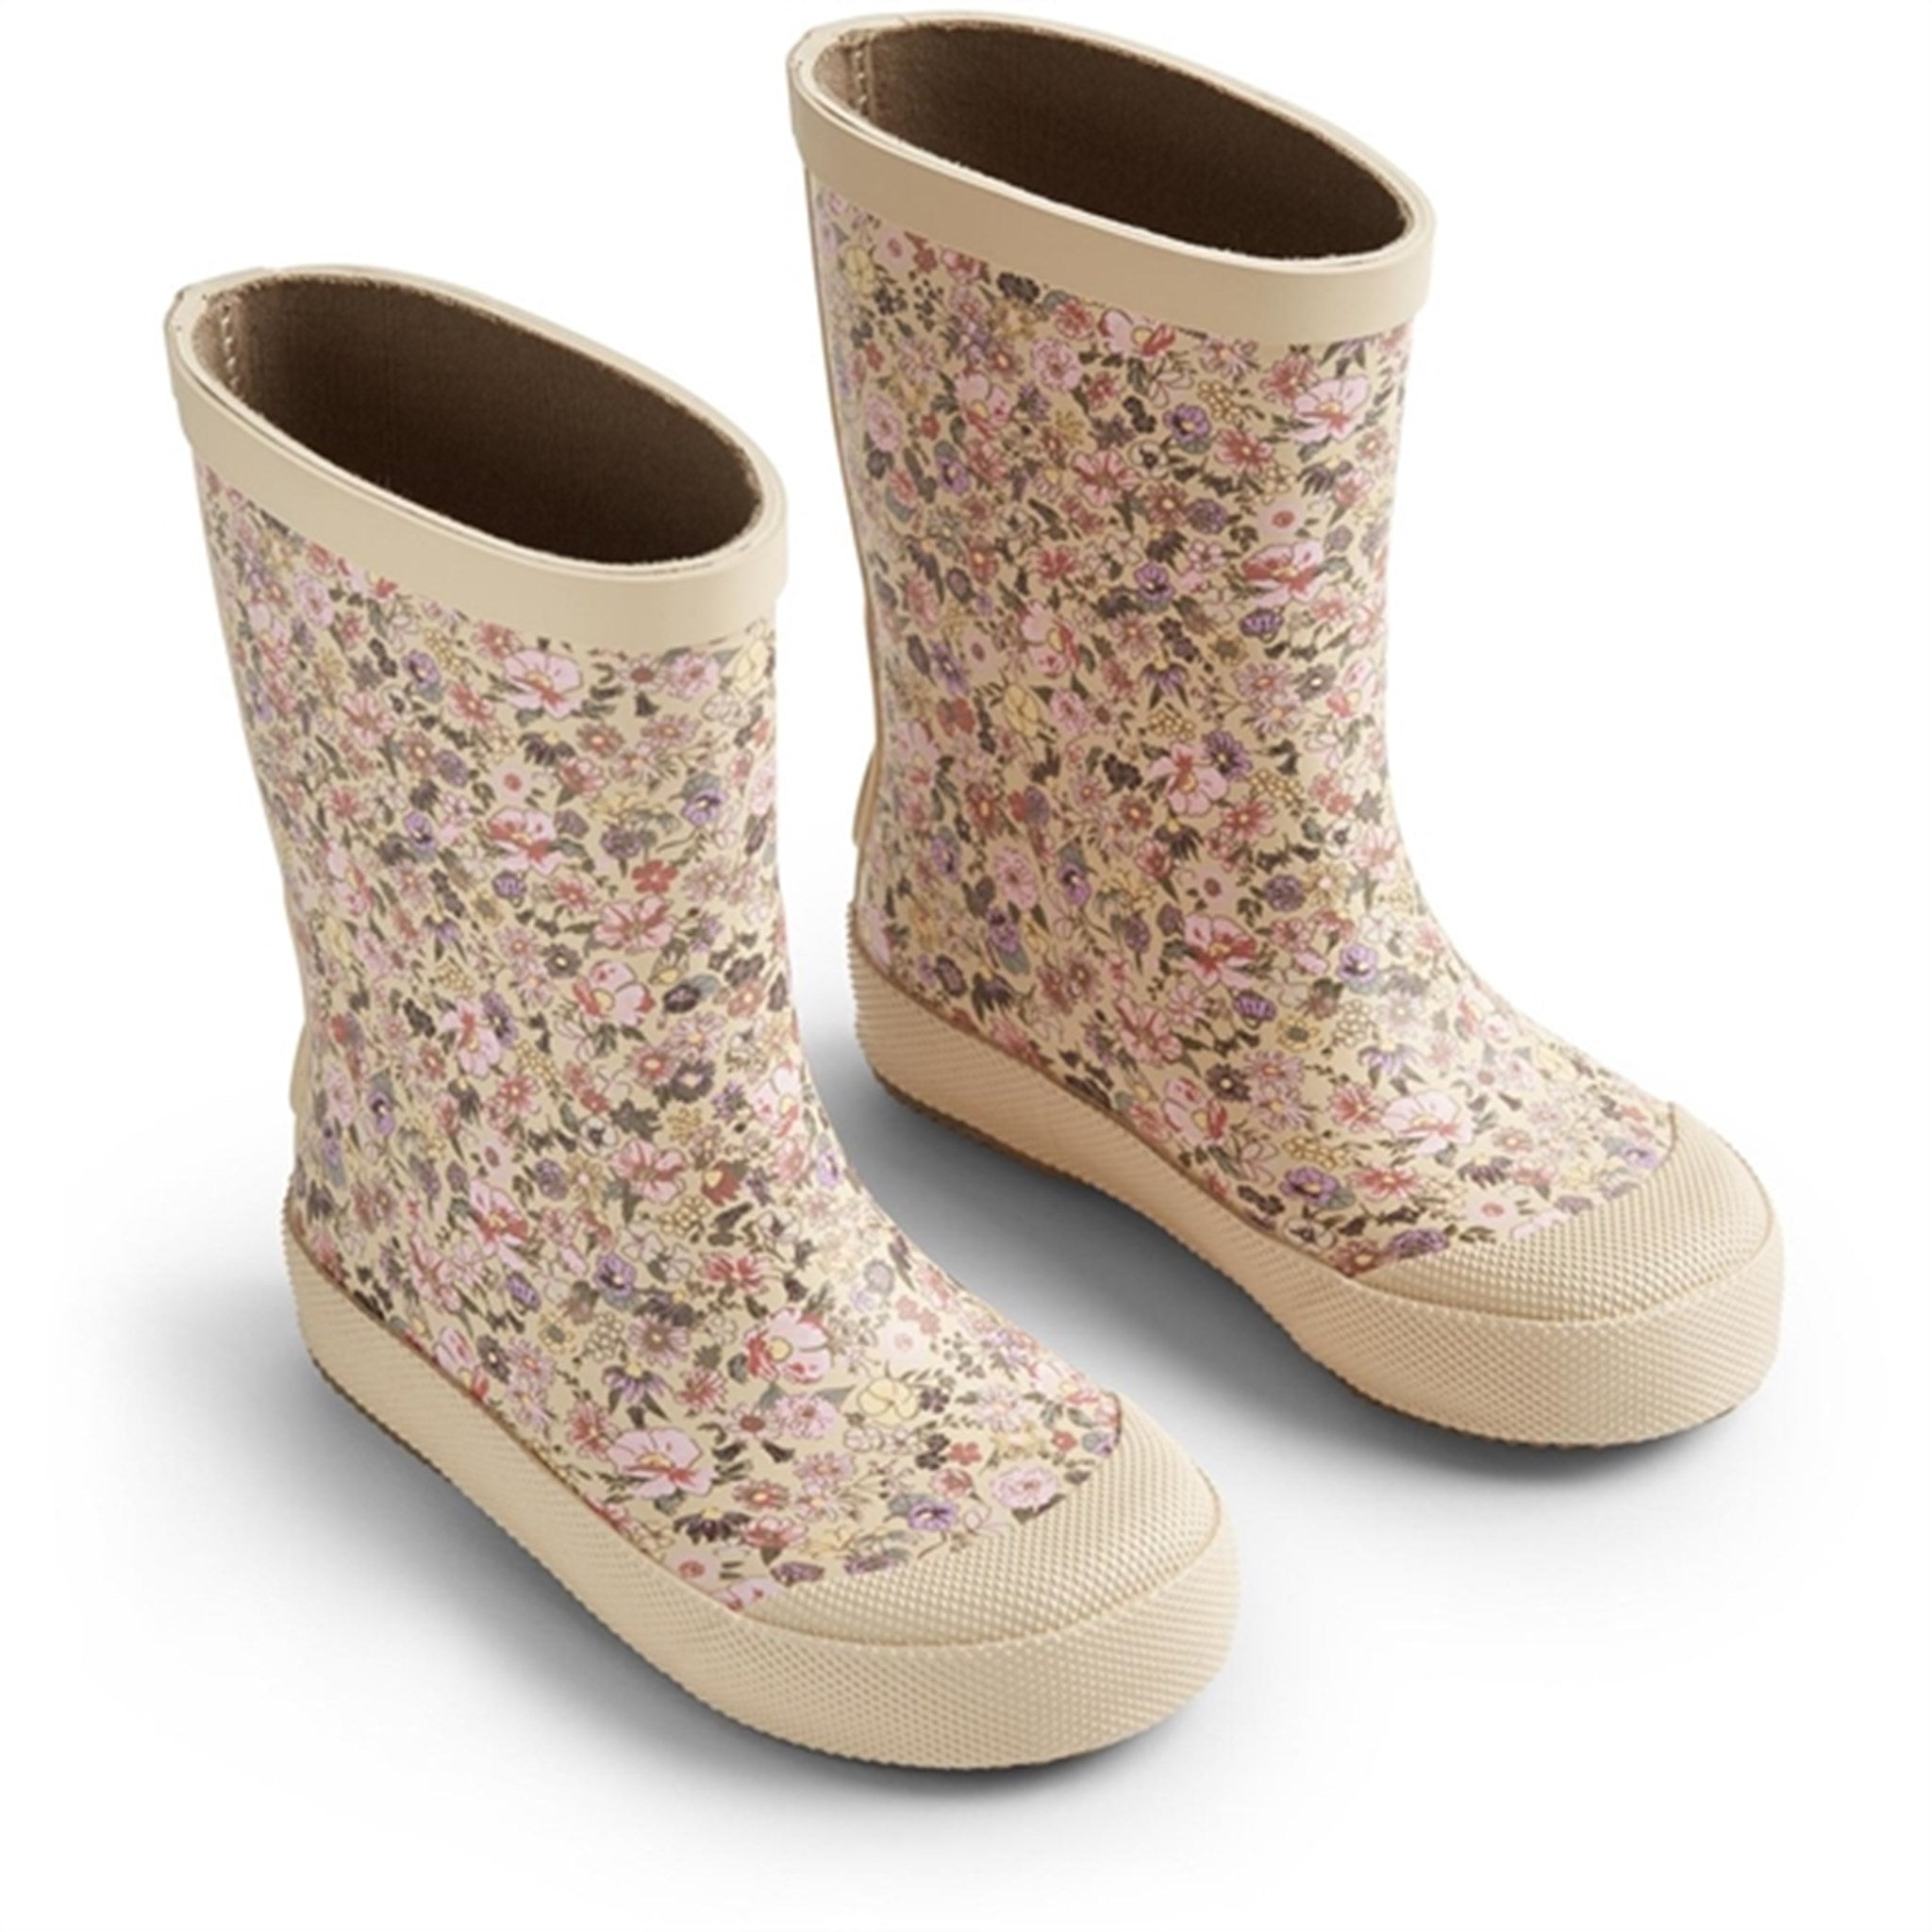 Wheat Rubber Boot Print Muddy Clam Multi Flowers